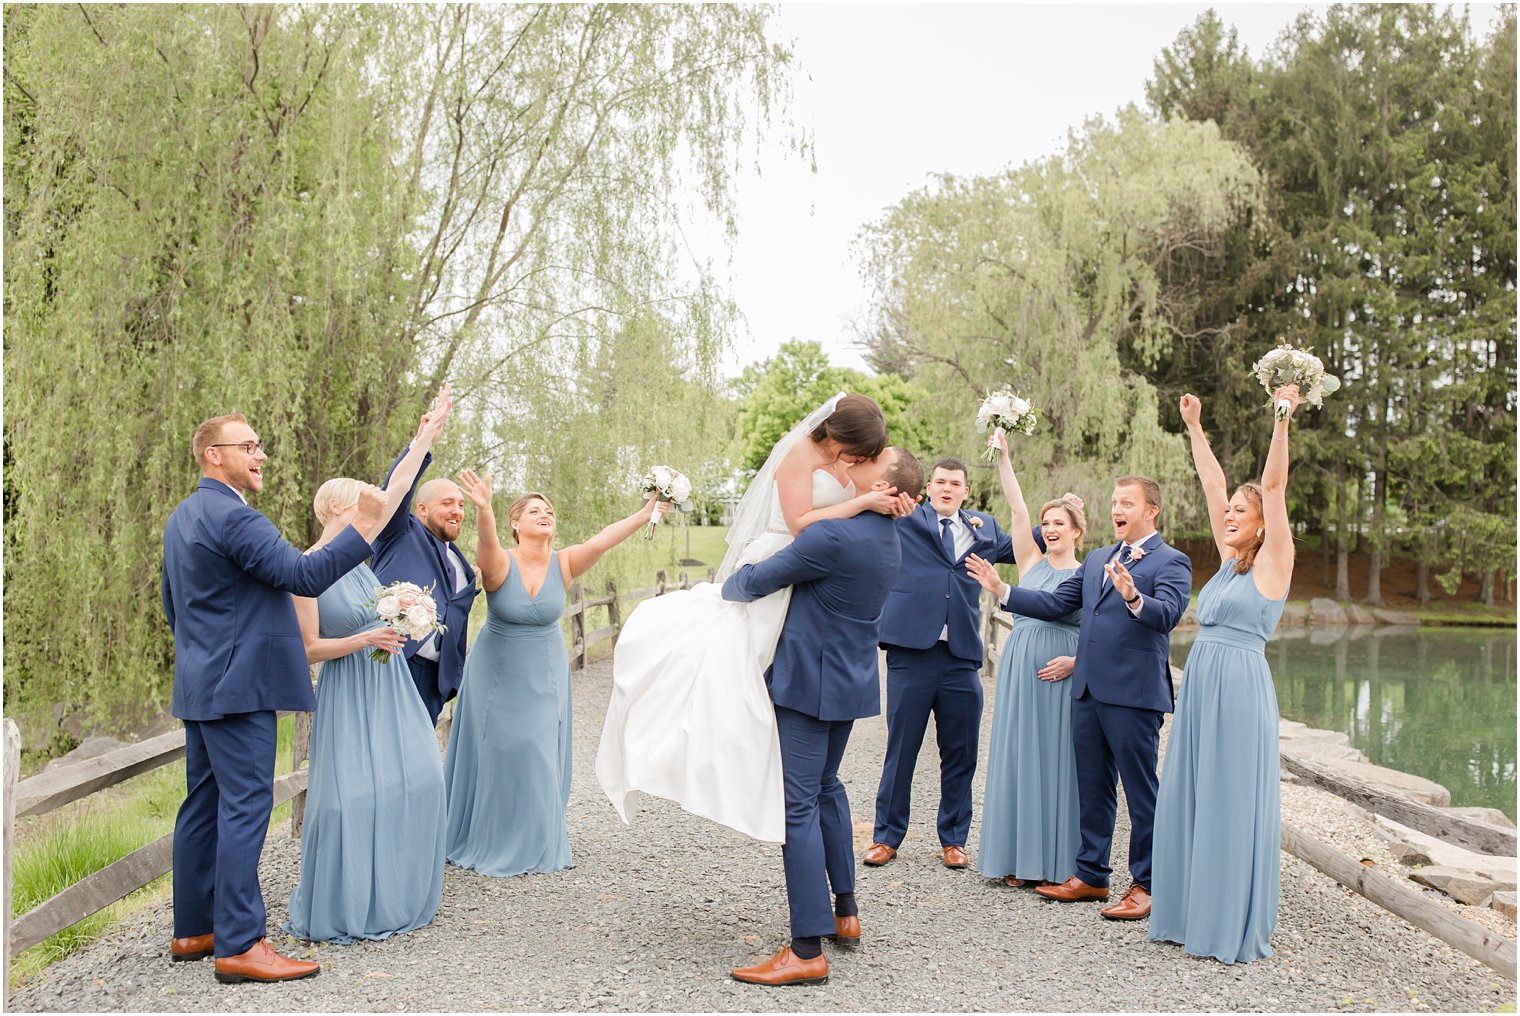 Fun bridal party photos at Windows on the Water at Frogbridge in Millstone NJ